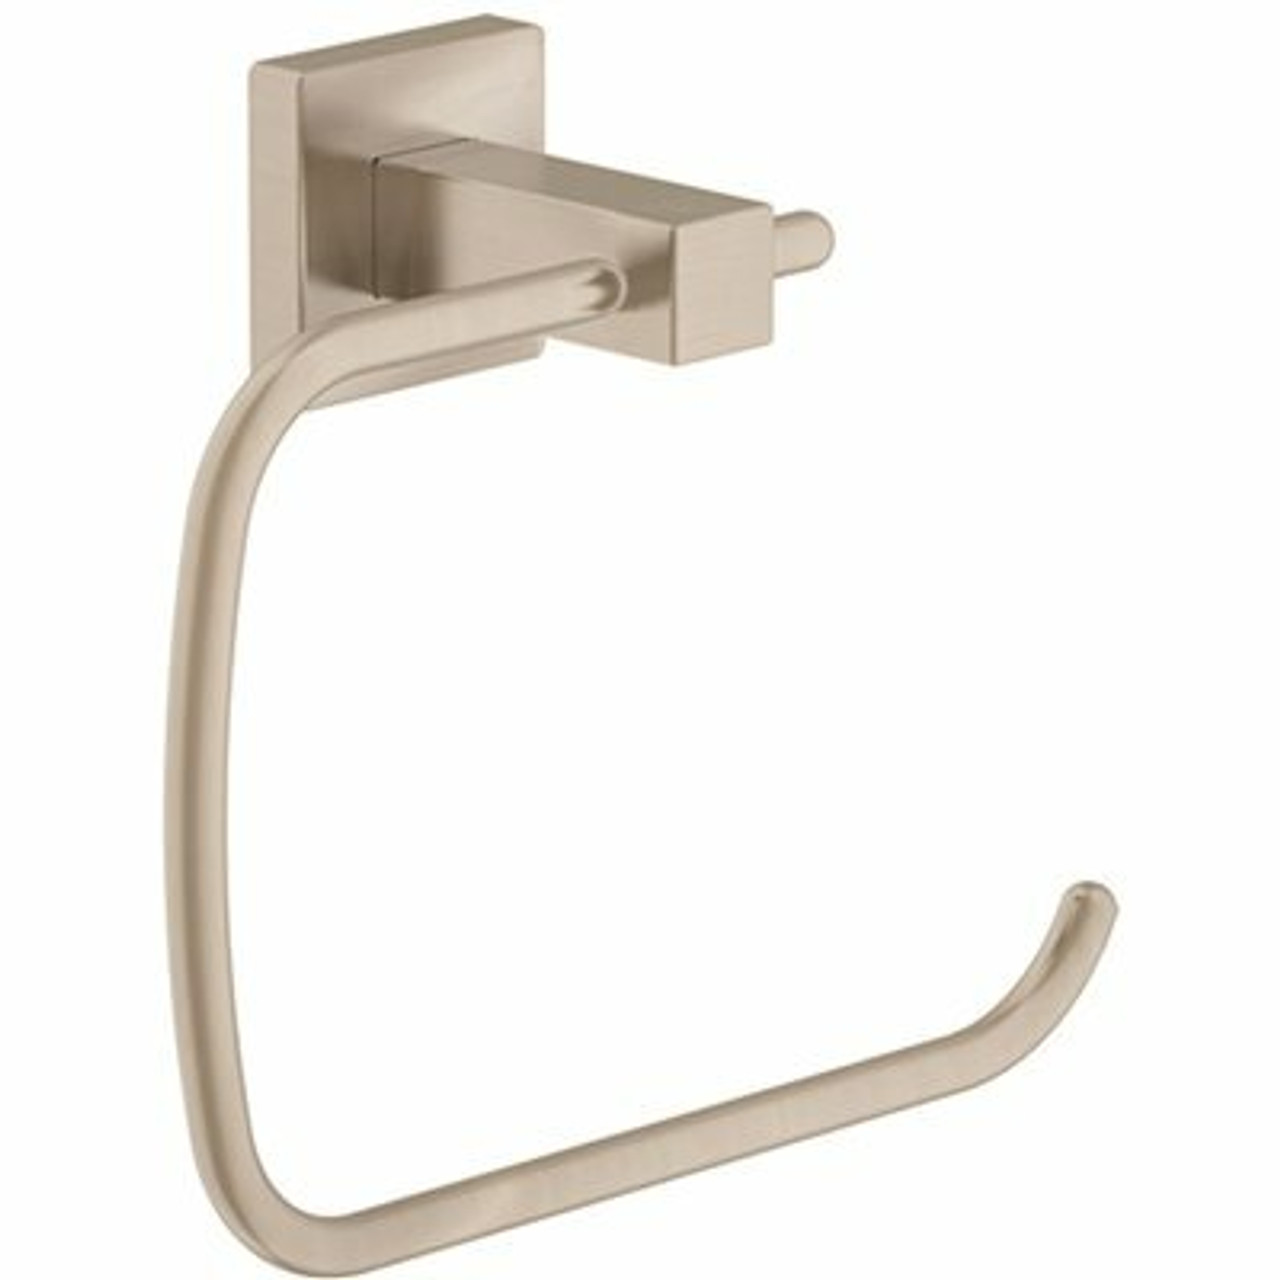 Symmons Duro Wall-Mounted Towel Ring In Satin Nickel